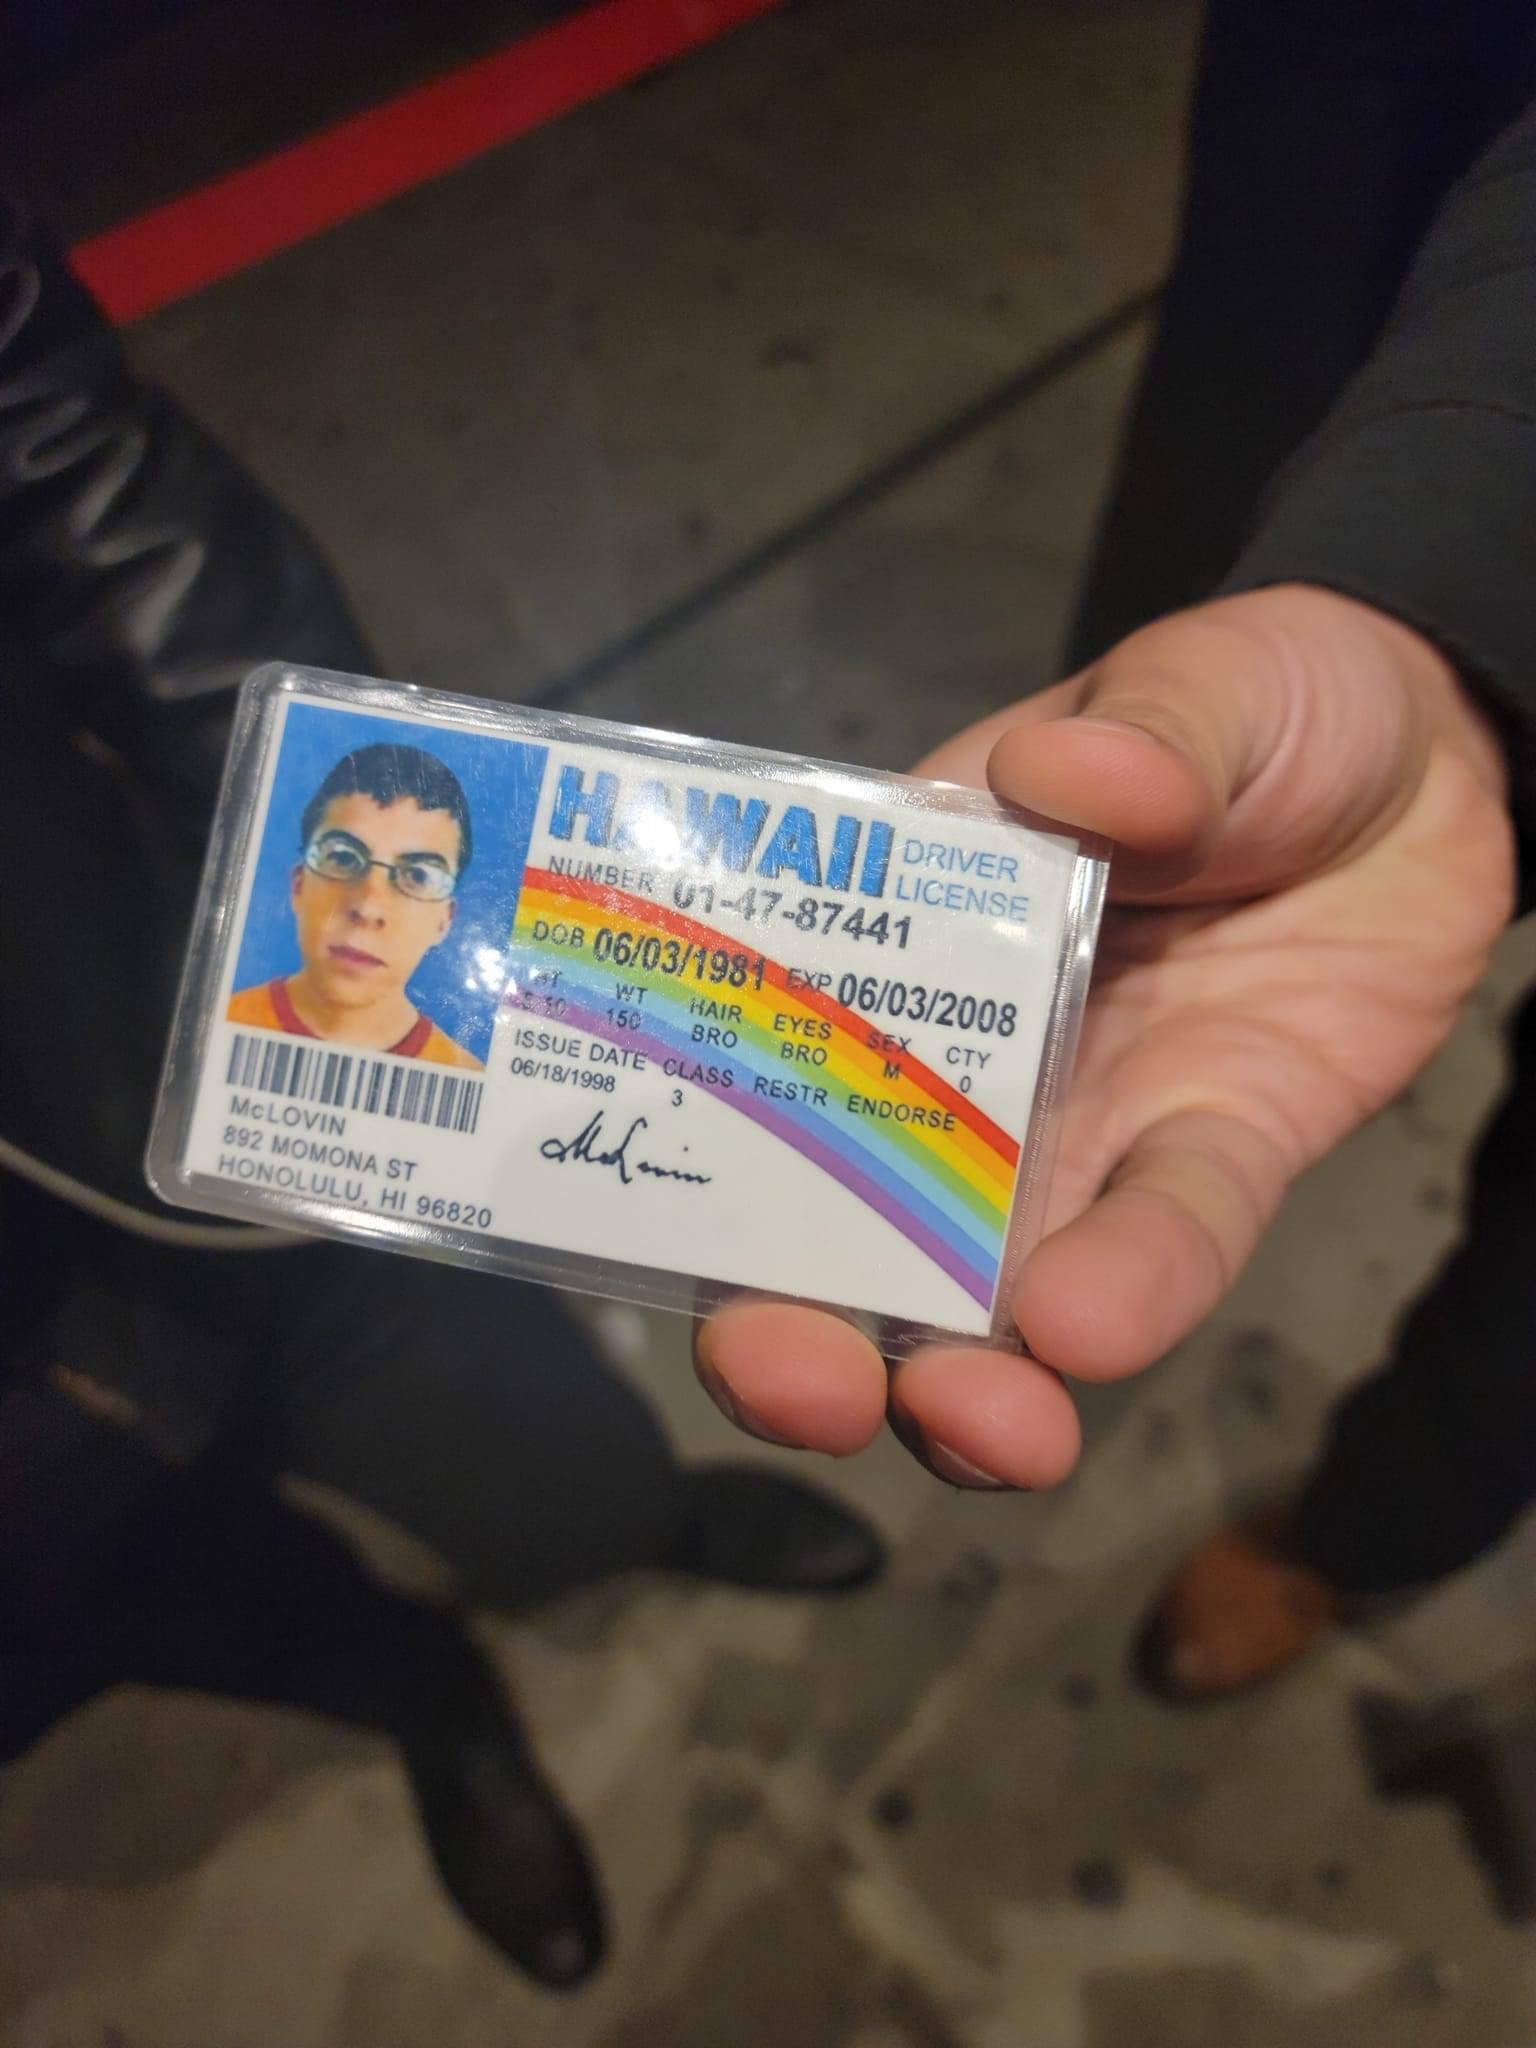 Friend works as security at a club in NYC and receives this as ID check.